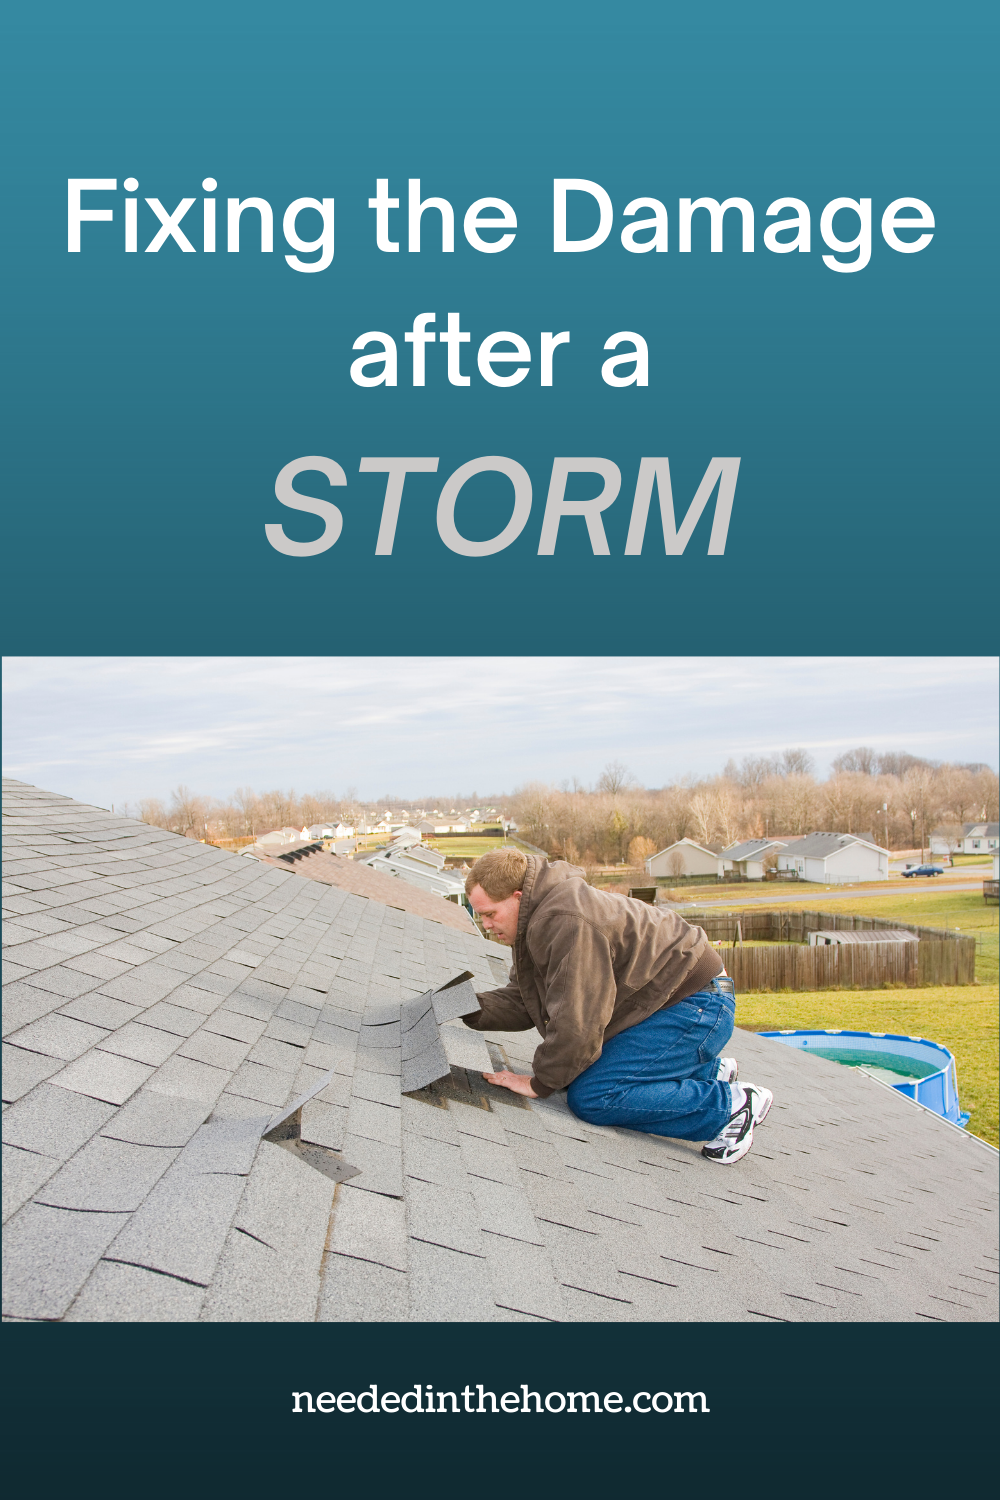 pinterest-pin-description Fixing the Damage after a Storm man on roof fixing shingles neededinthehome